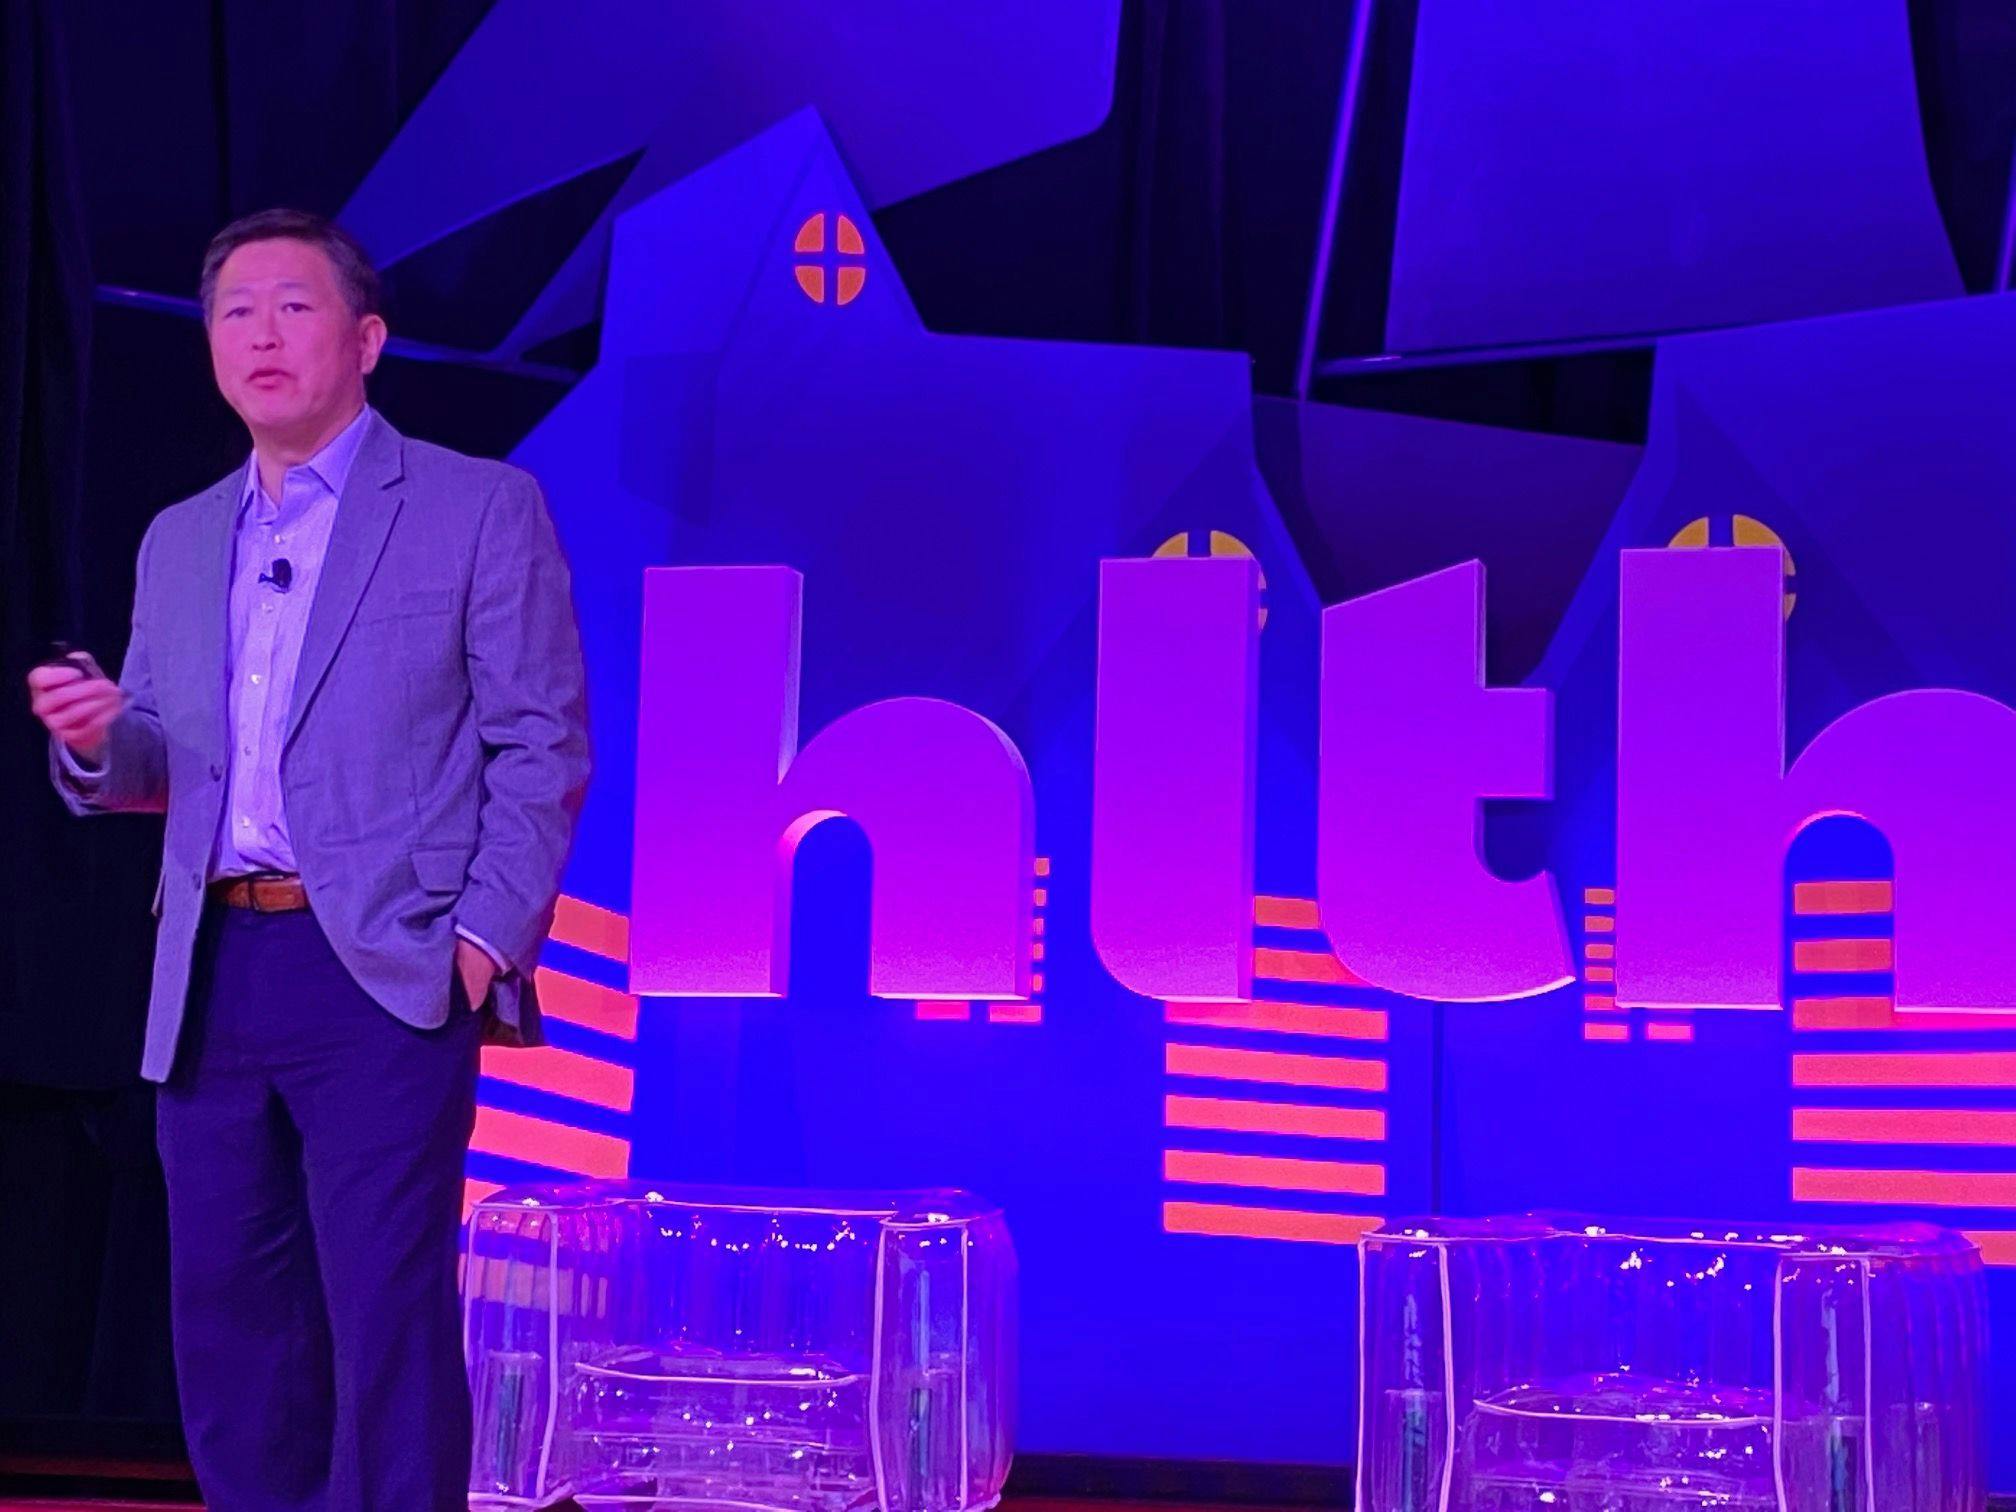 Jaewon Ryu, president and CEO of Geisinger Health, speaks at the HLTH Conference in November 2022. Ryu will be named the inaugural CEO of the new Risant Health when the transaction is complete. (Photo: Ron Southwick)